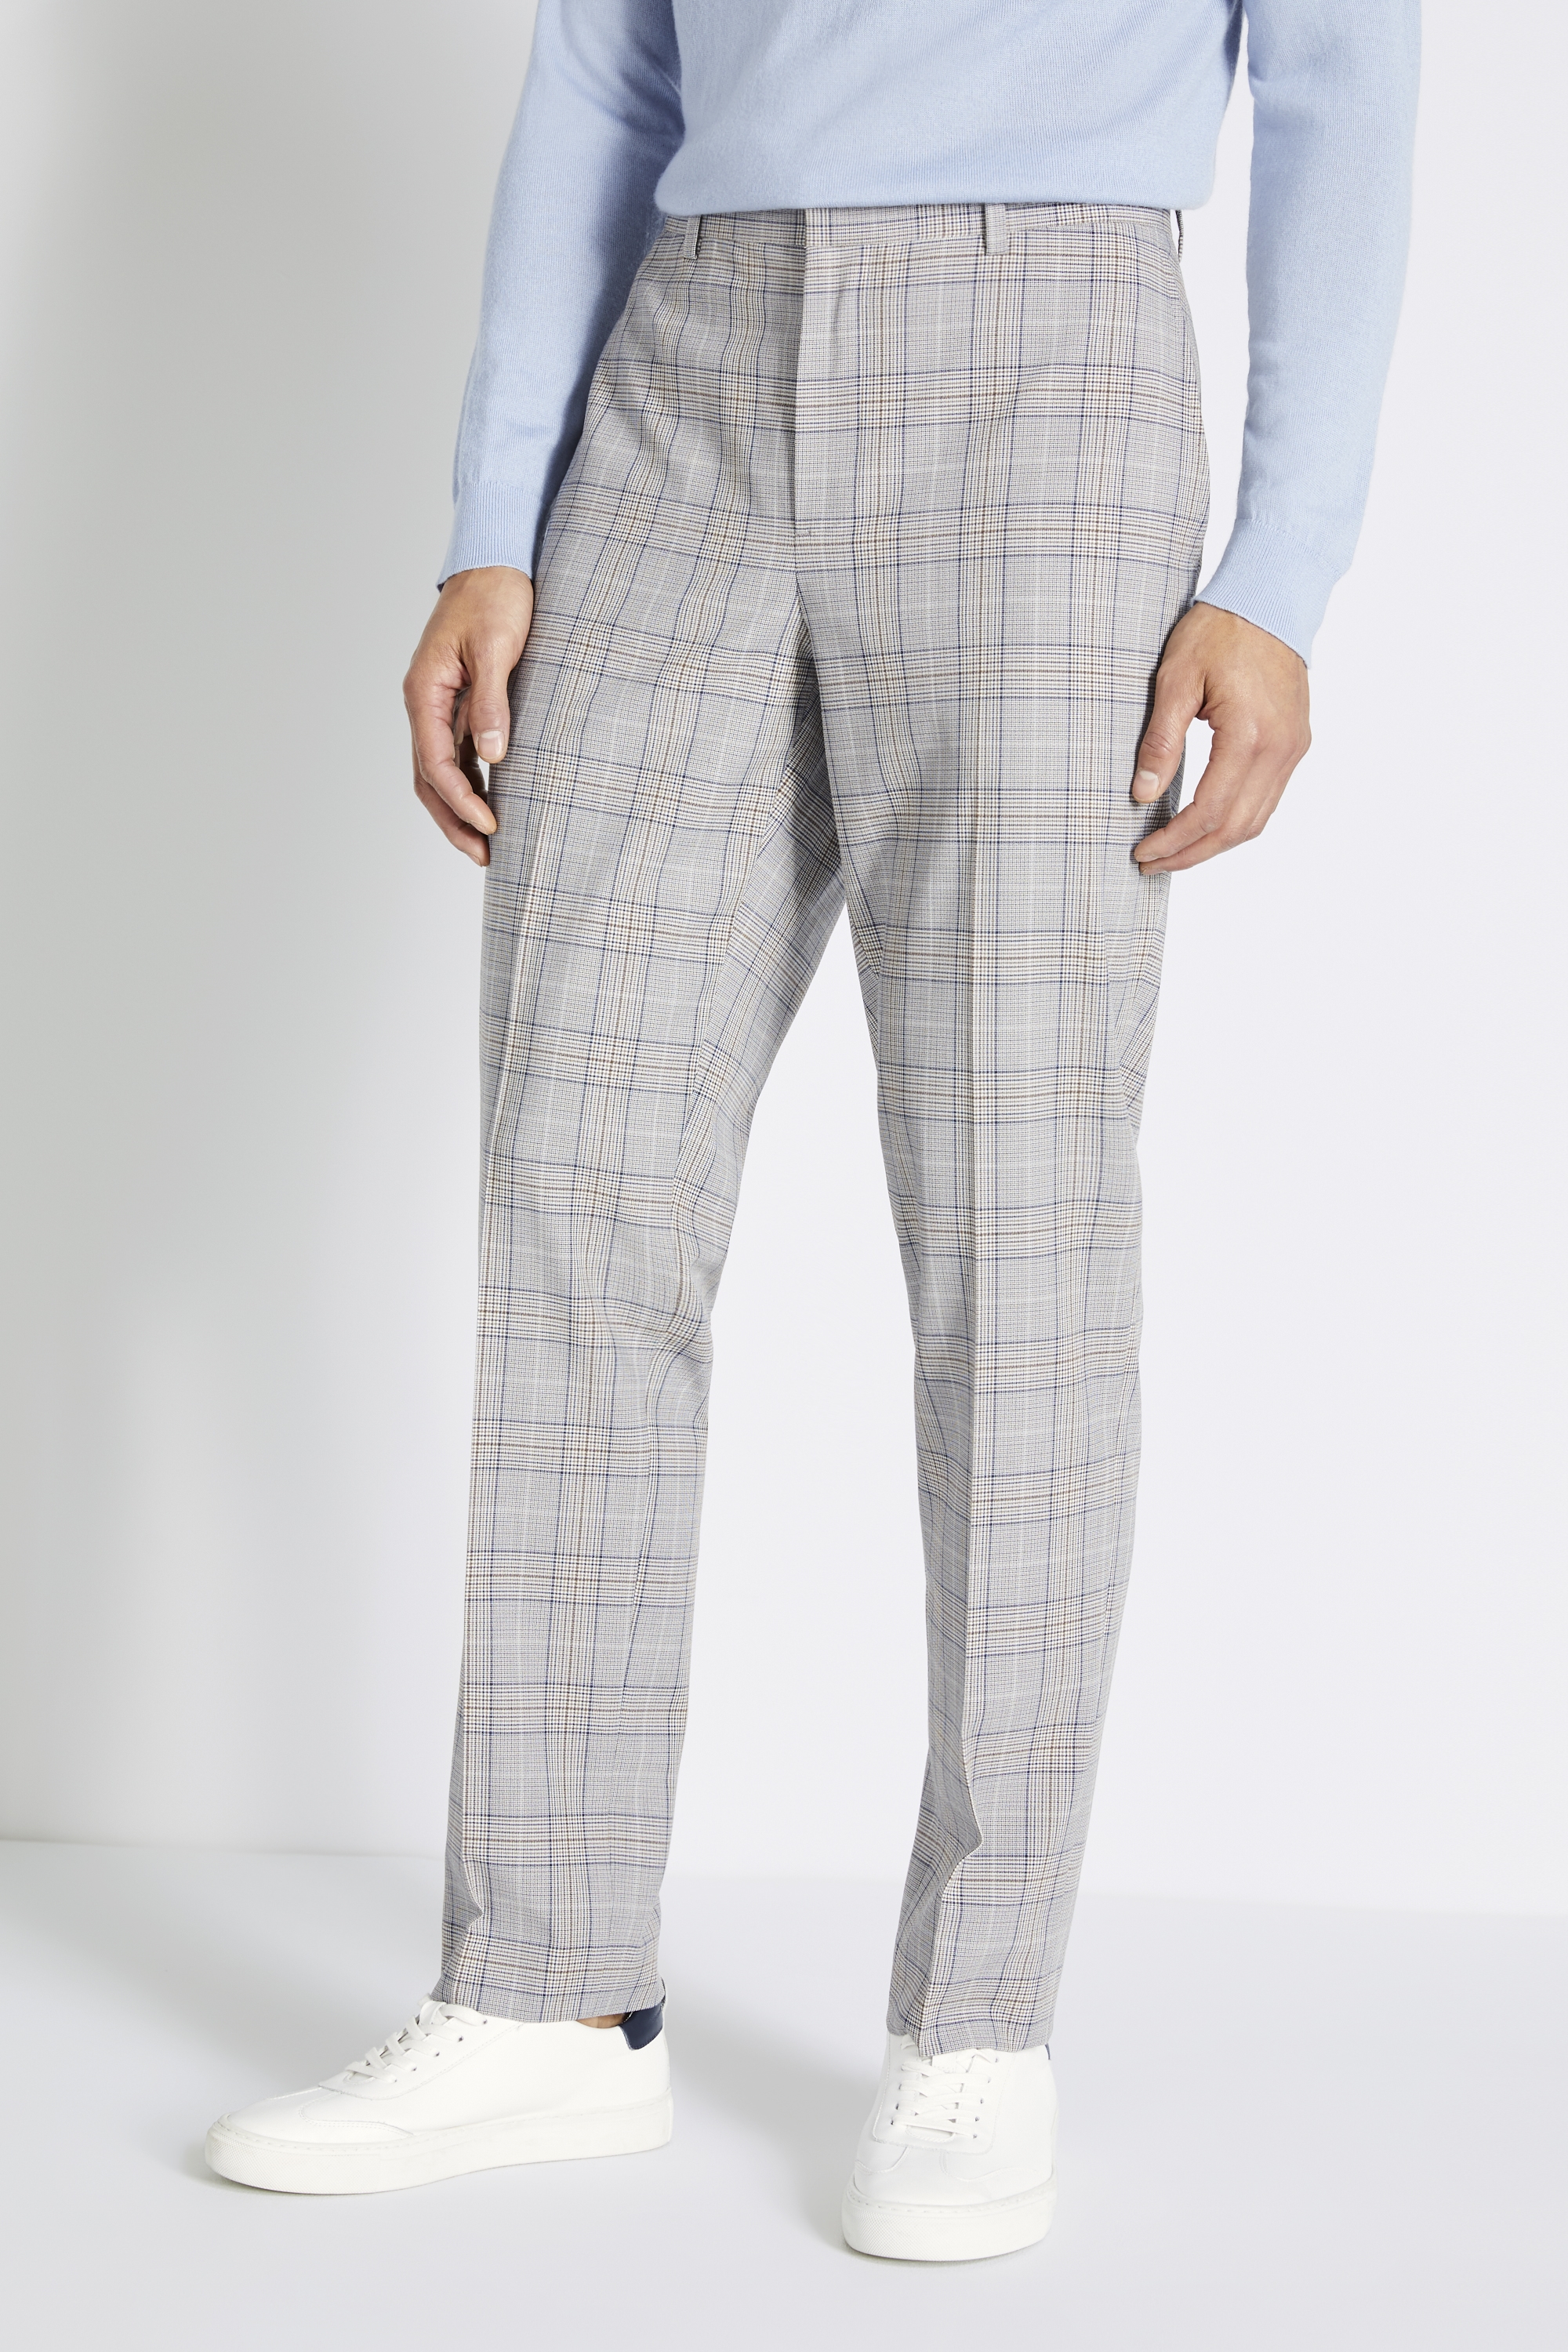 Tailored Fit Grey Navy Brown Check Trousers | Buy Online at Moss